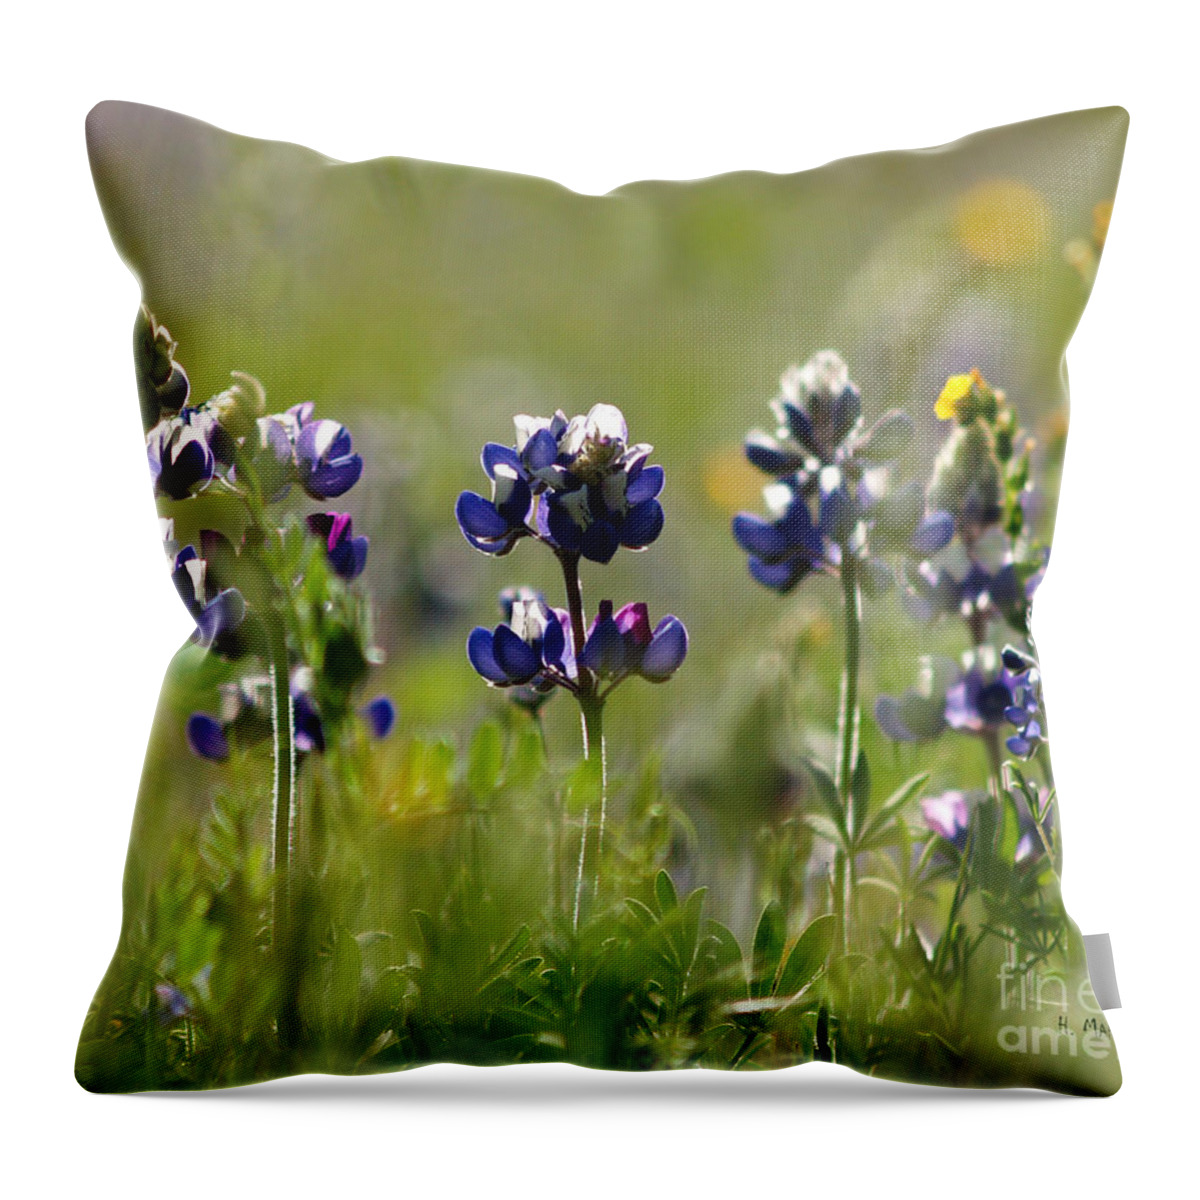 Wild Flower Image Throw Pillow featuring the photograph Morning Wild Flowers by Haleh Mahbod